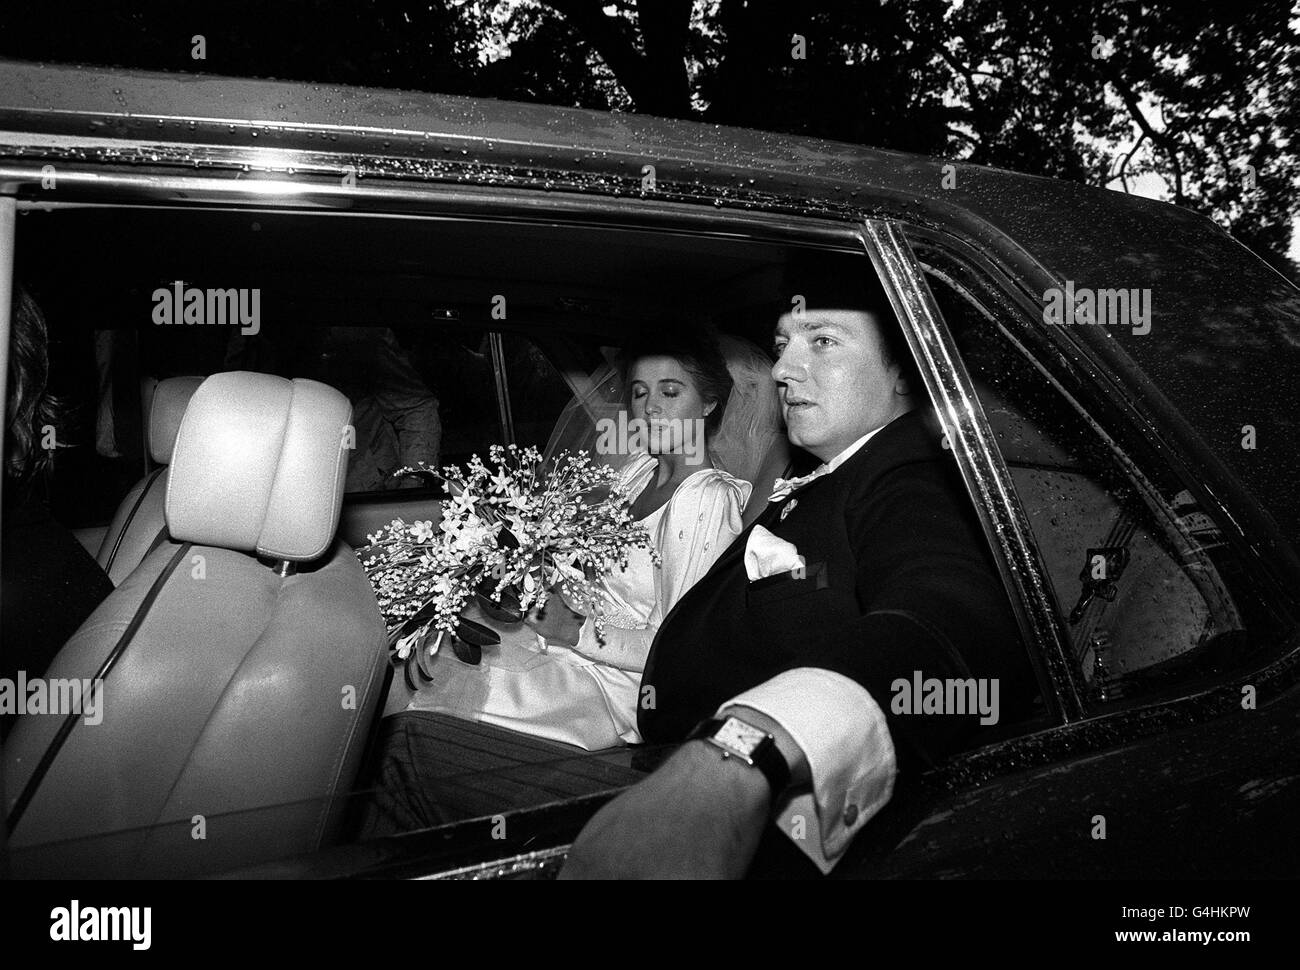 PA NEWS PHOTO 14/9/84 EARL JERMYN (29) HEIR TO THE MARQUIS OF BRISTOL, AND HIS BRIDE, THE FROMER FRANCESCA FISHER, DAUGHTER OF A MARBELLA PROPERTY CONSULTANT DRIVE AWAY FROM THE ESTATE CHURCH AT ICKWORTH AFTER THE WEDDING CEREMONY Stock Photo